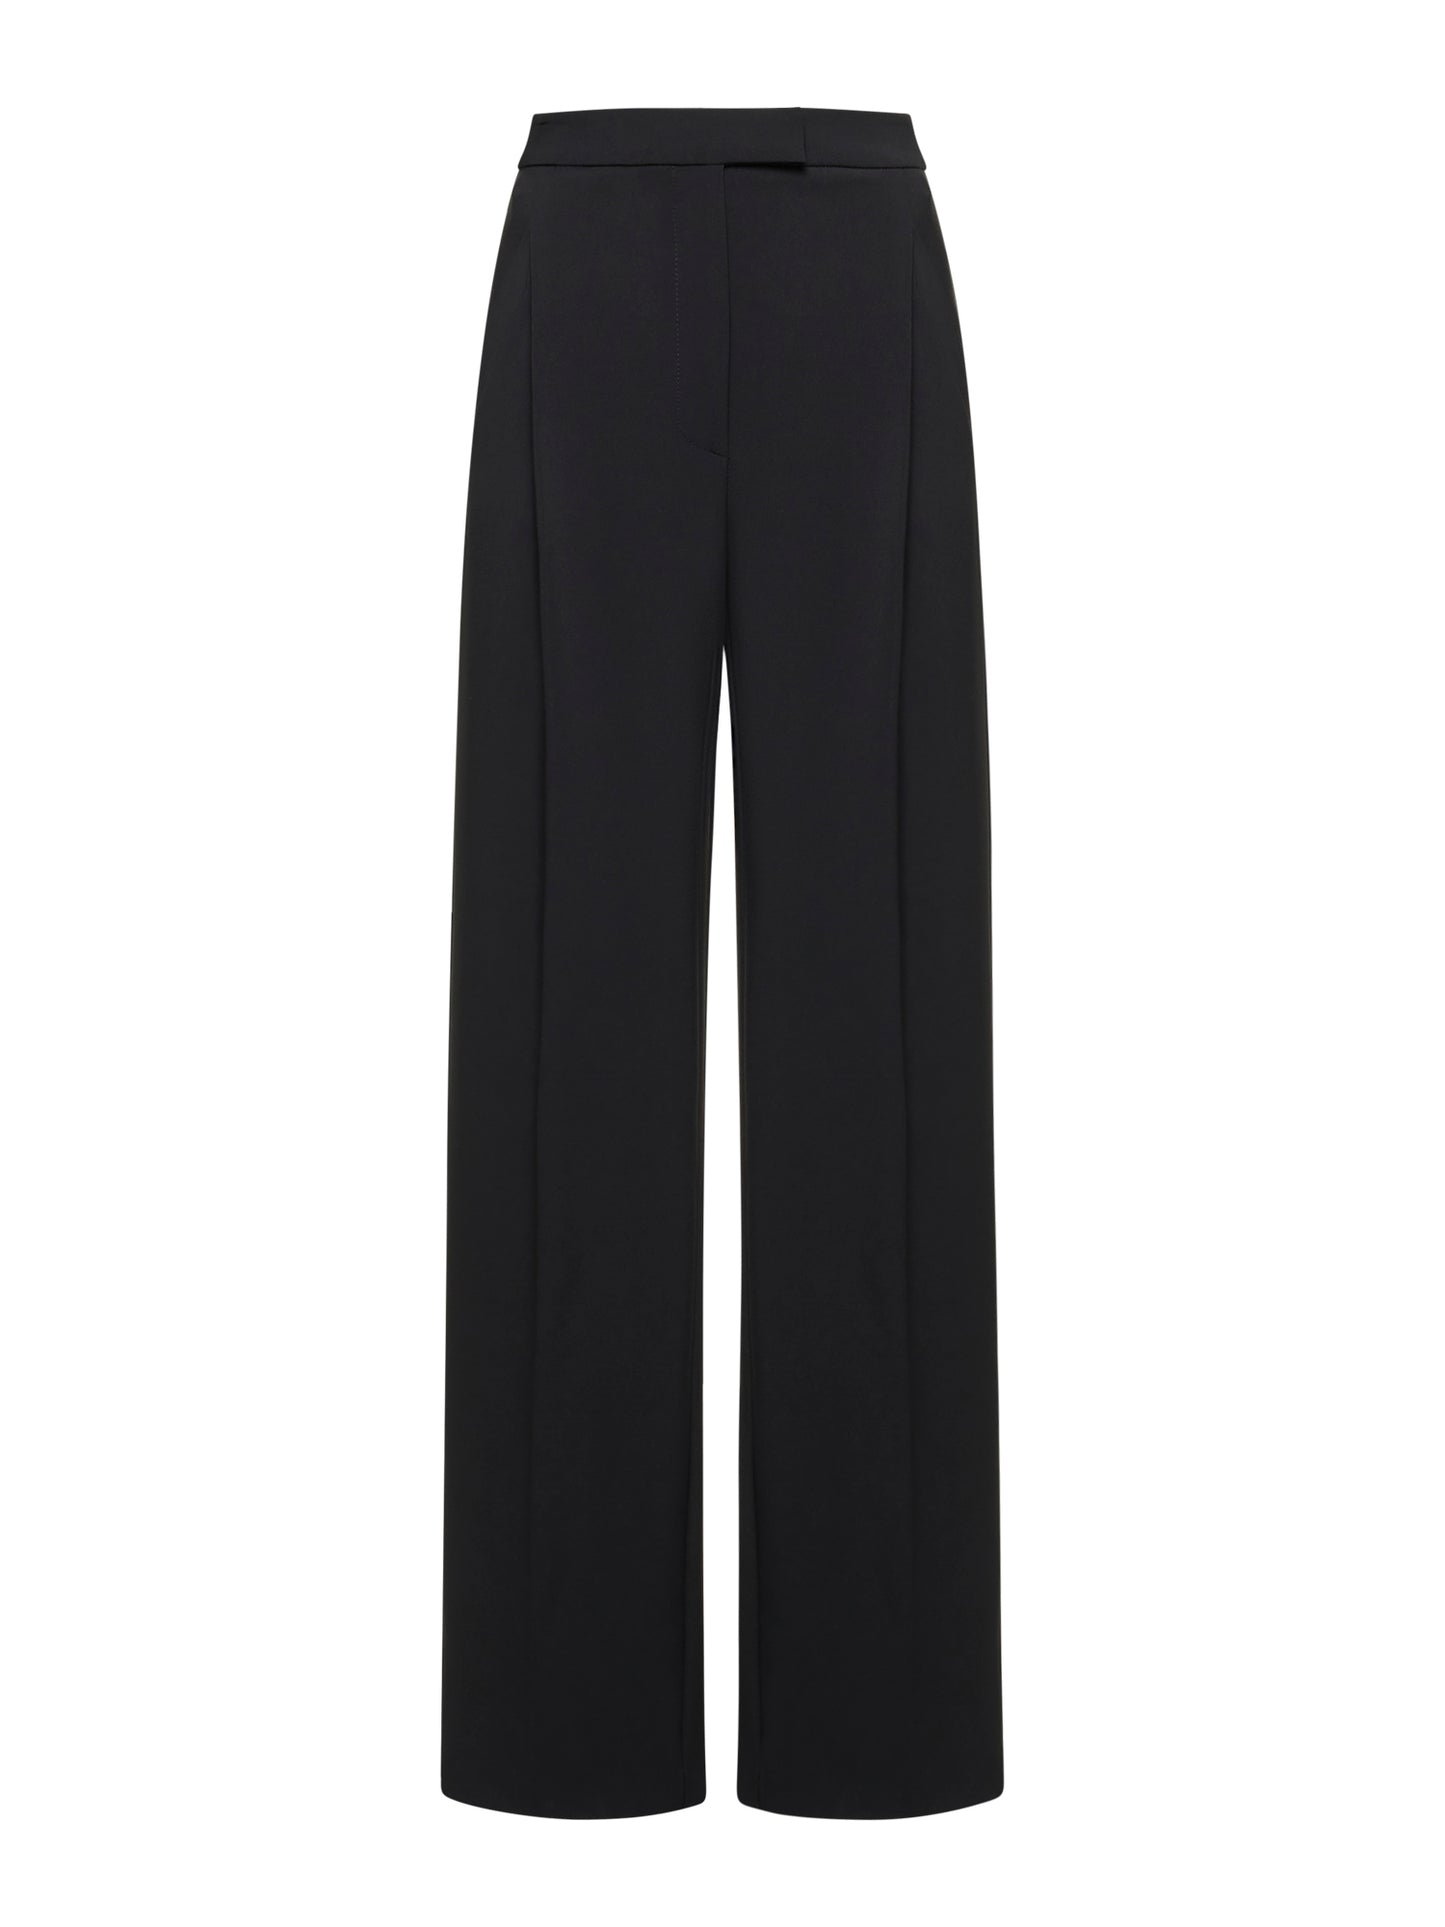 Wide-leg trousers in glamorous crepe